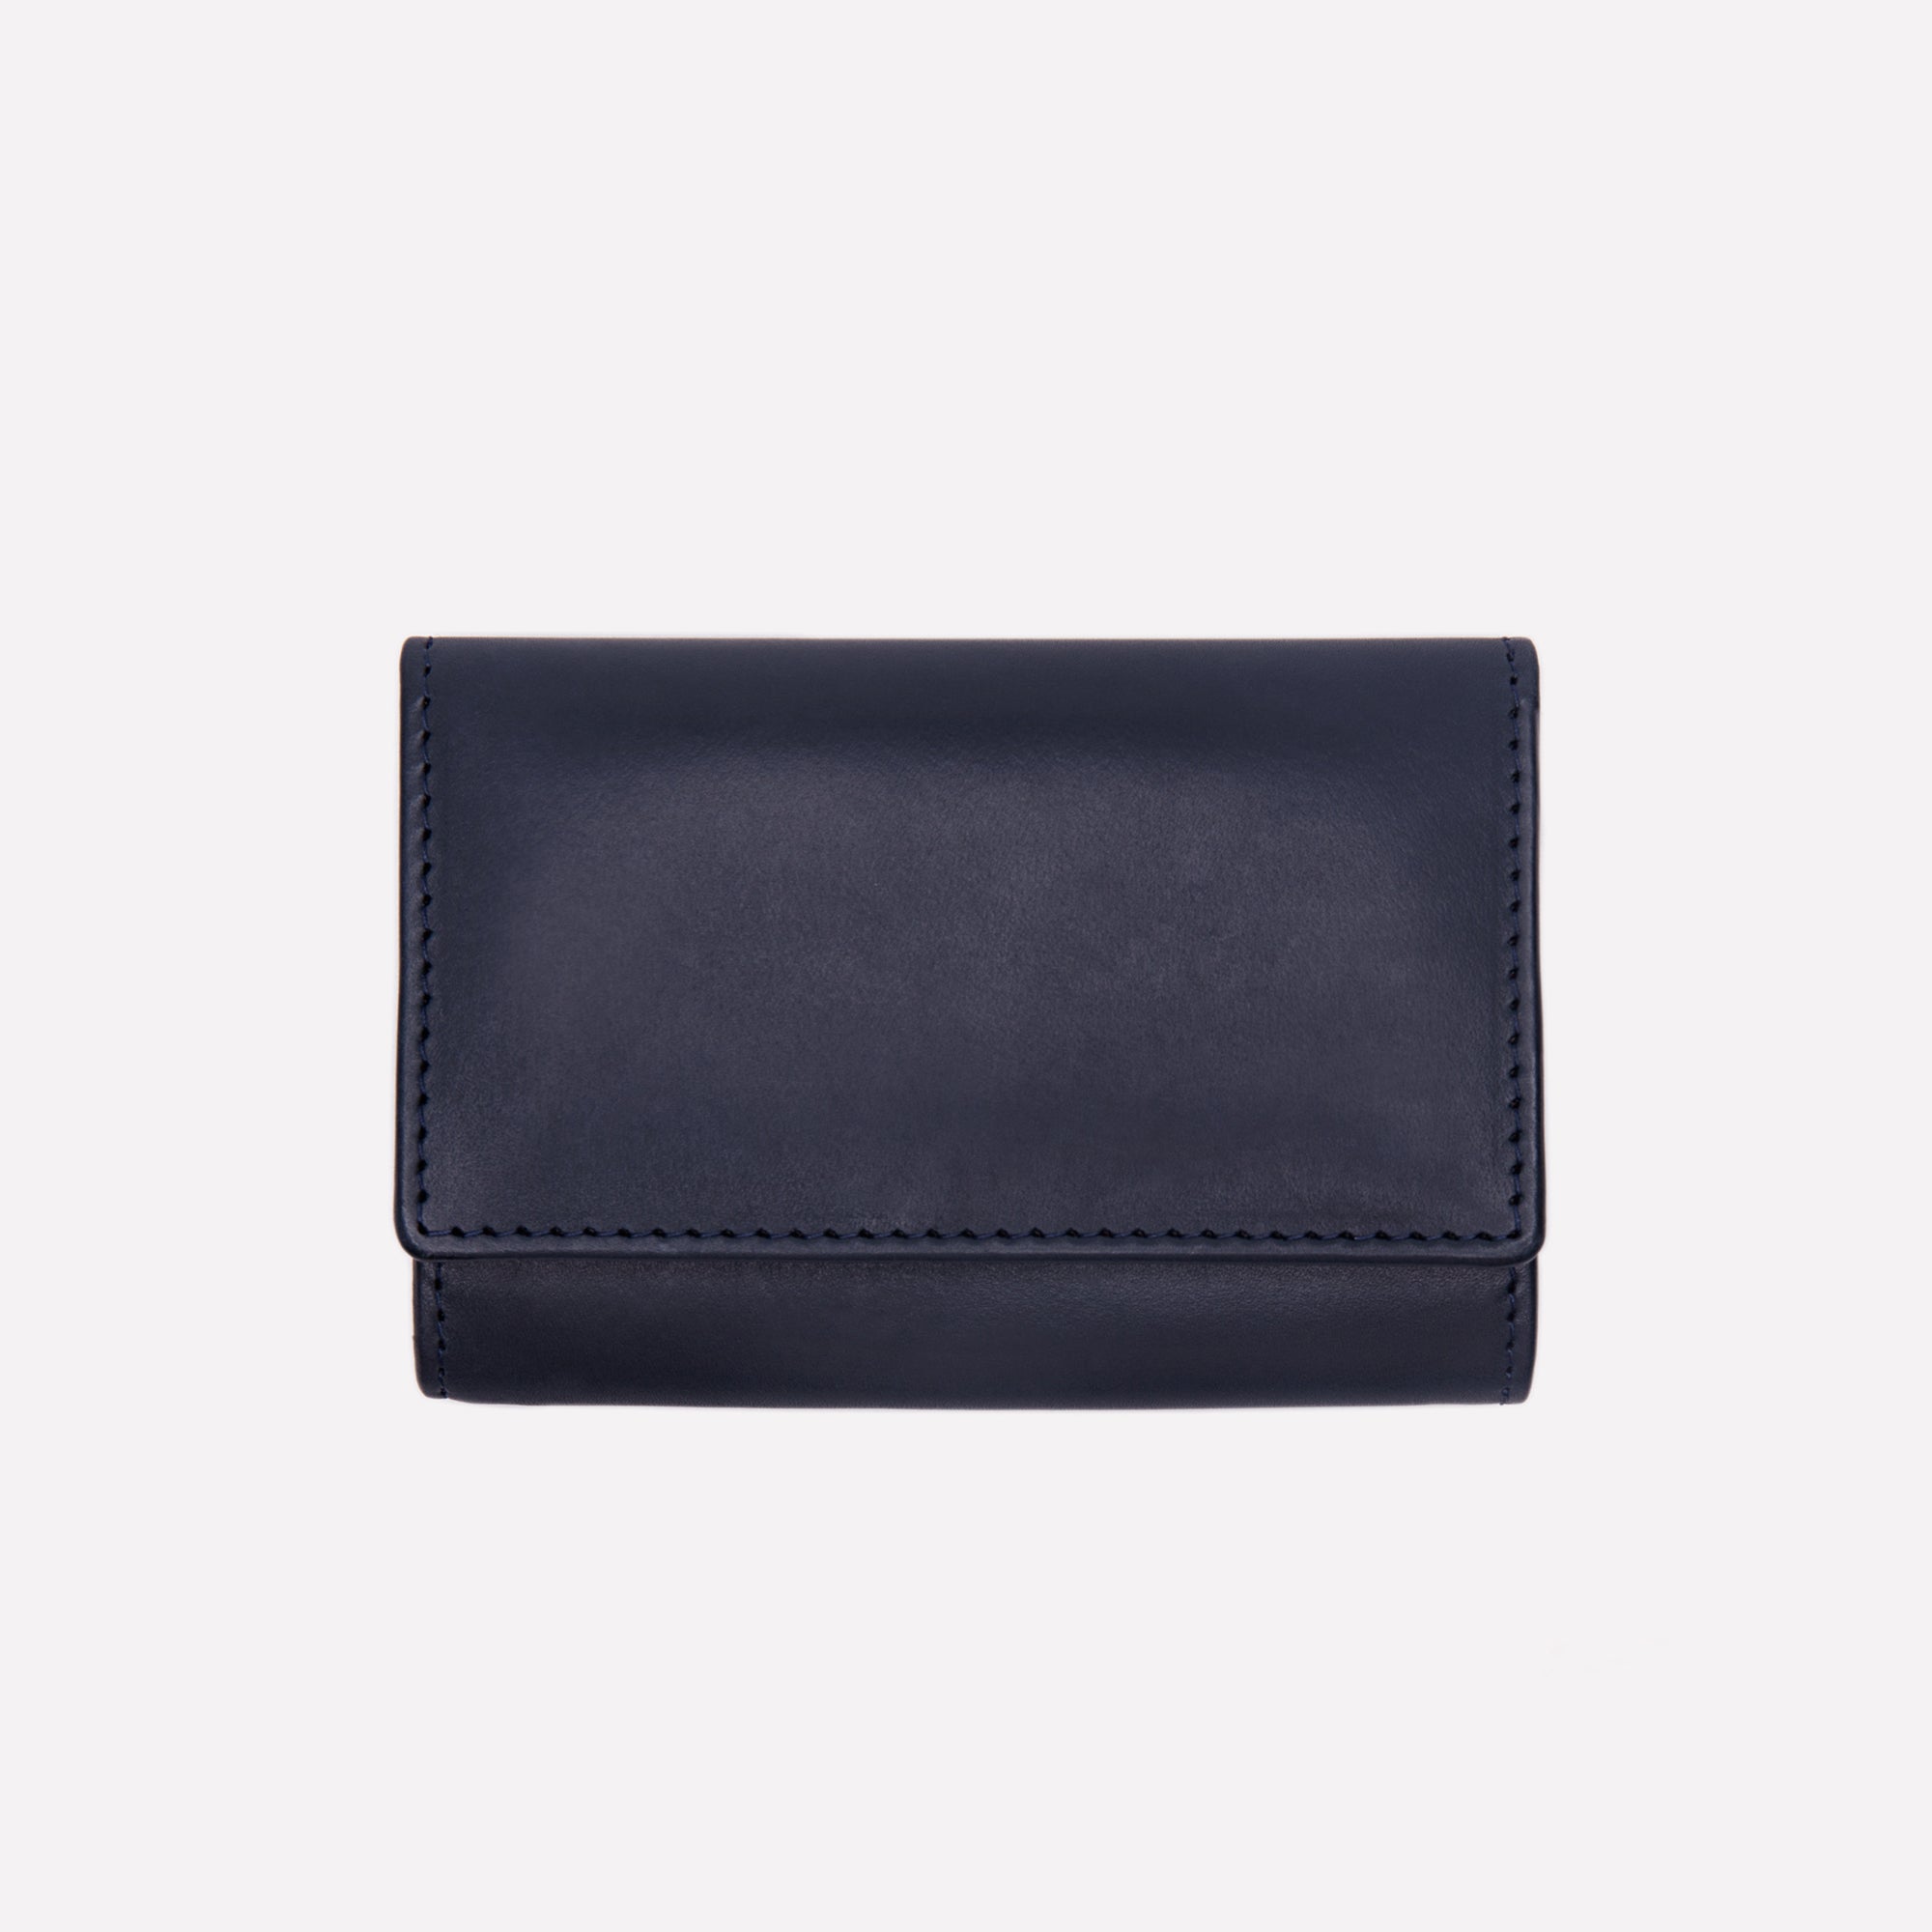 SEA LEATHER COIN CASE BLACK - コインケース